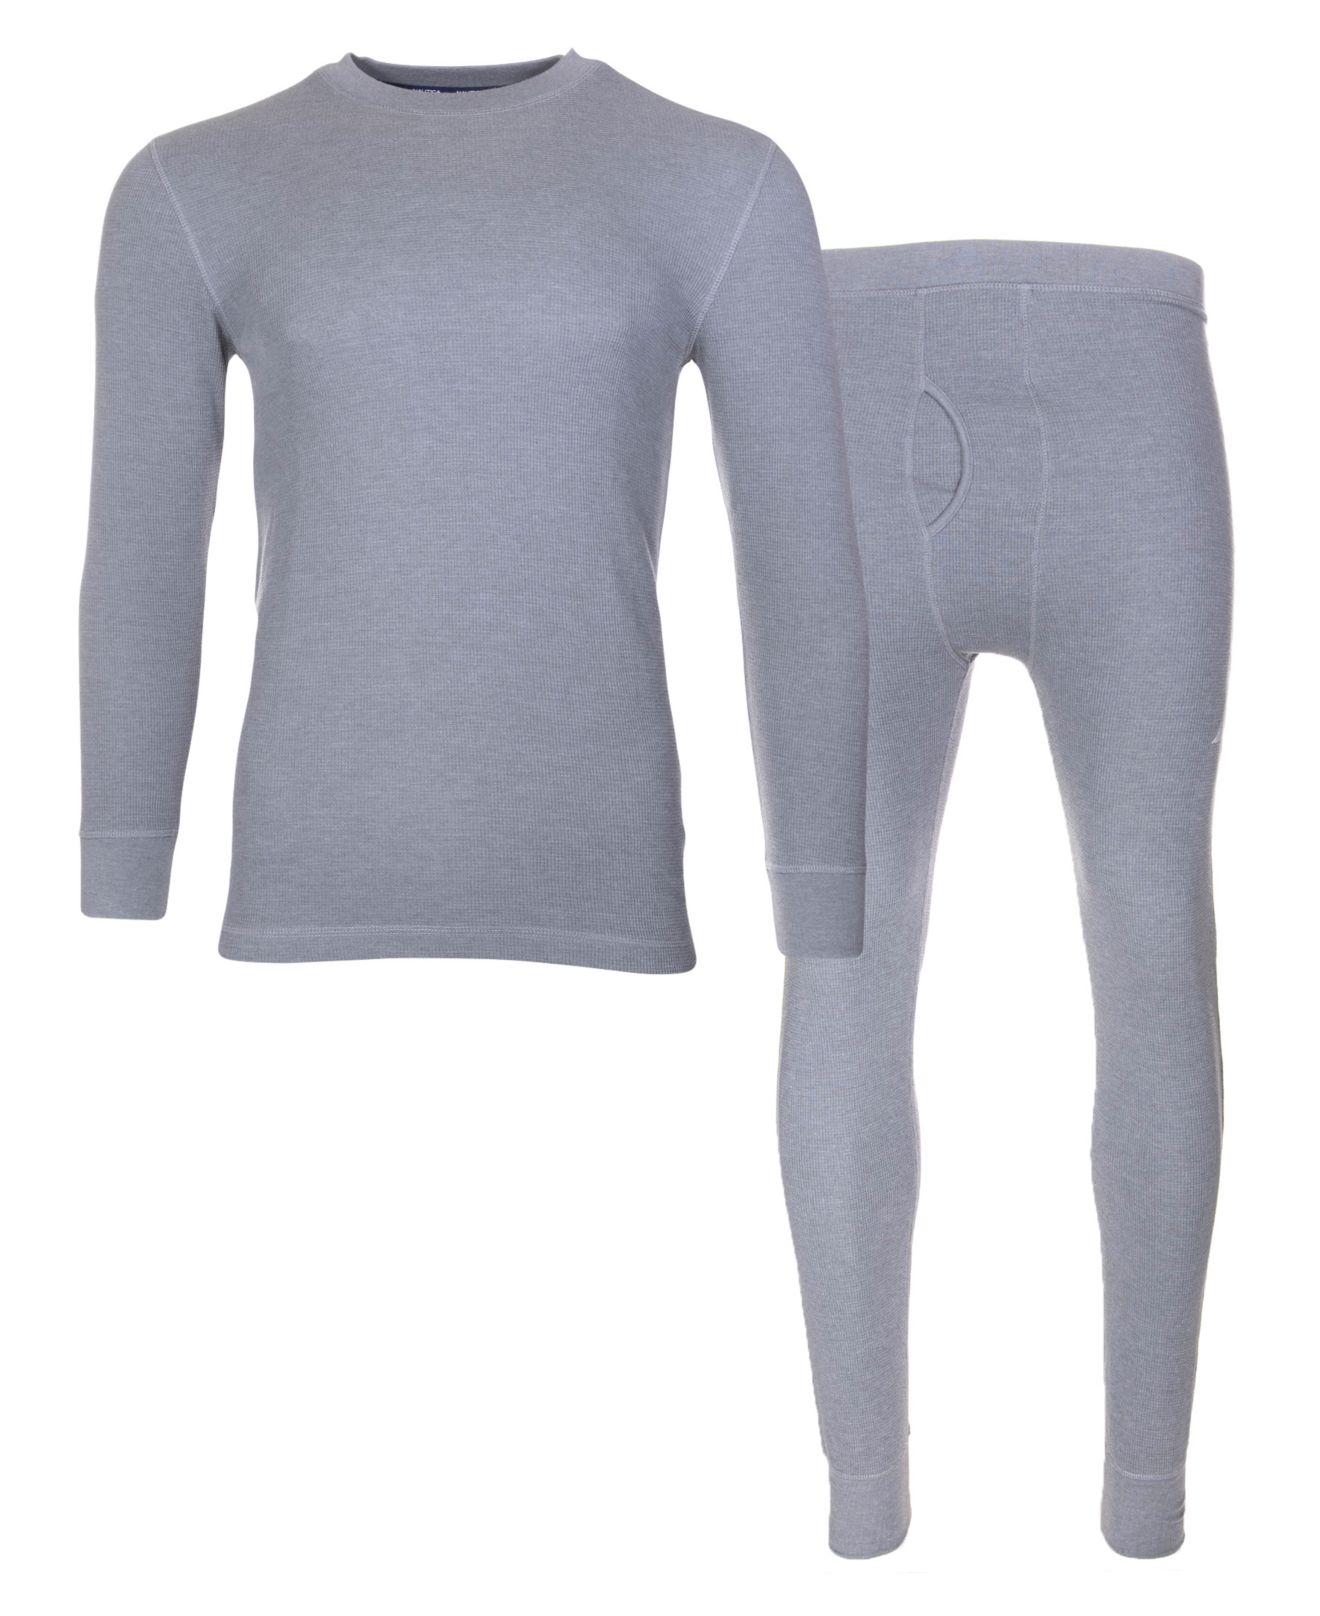 Nautica Cotton 2 Piece Waffle Thermal Sets in Blue for Men - Save 6% - Lyst